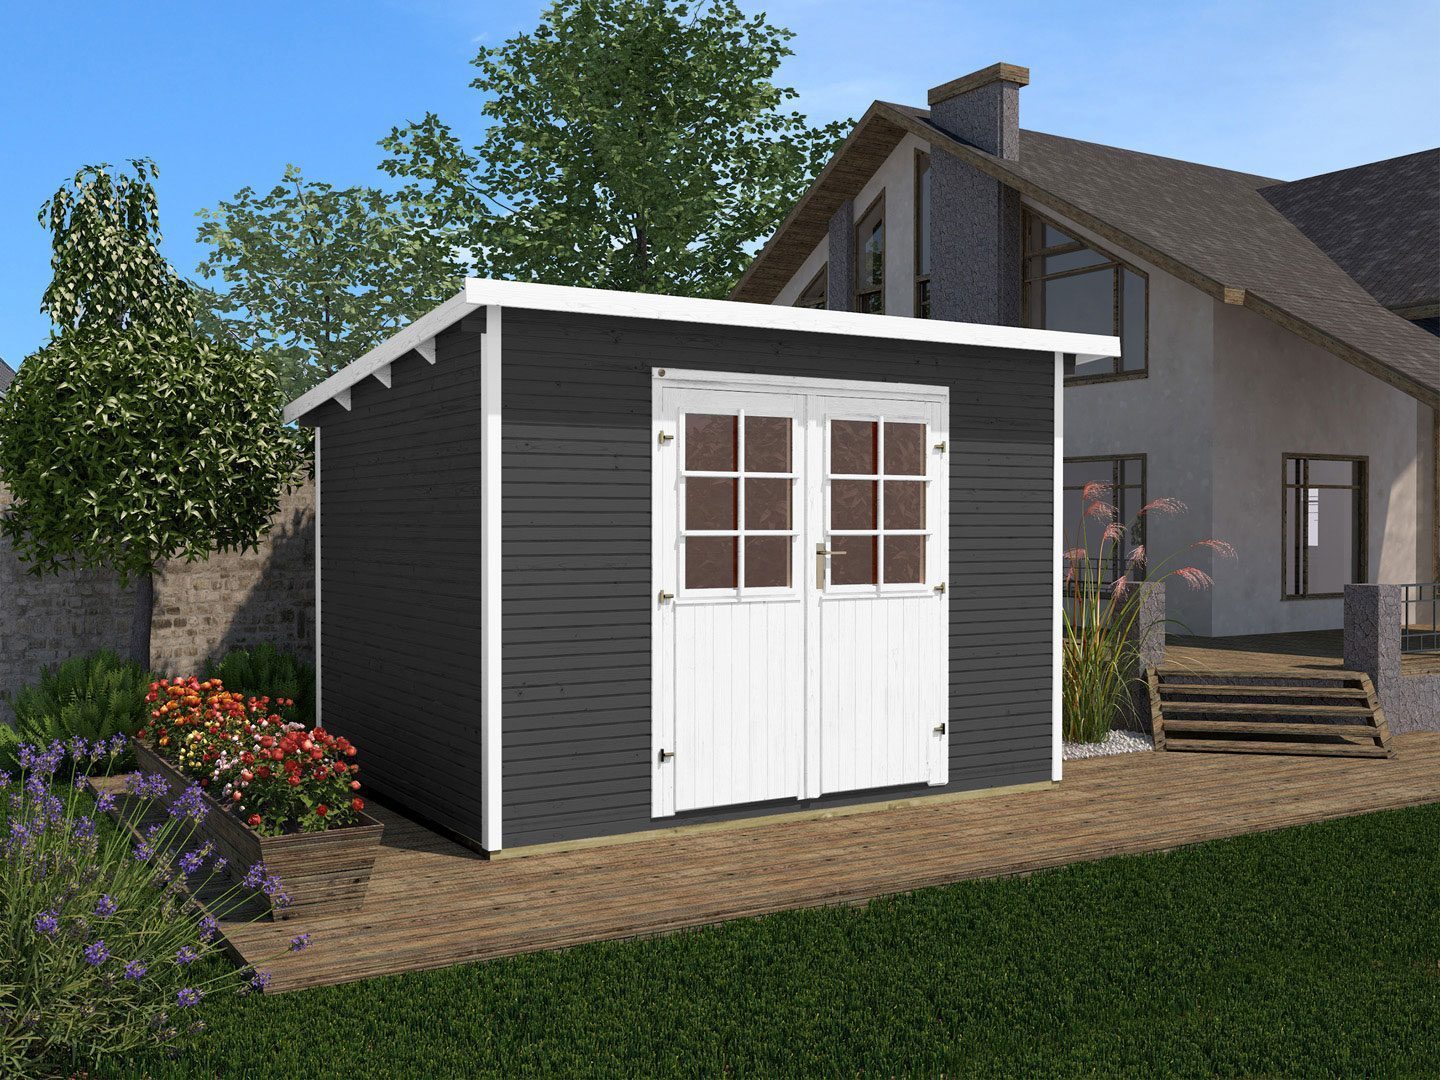 Roof different Shed 219 colours Flat in Garden - model